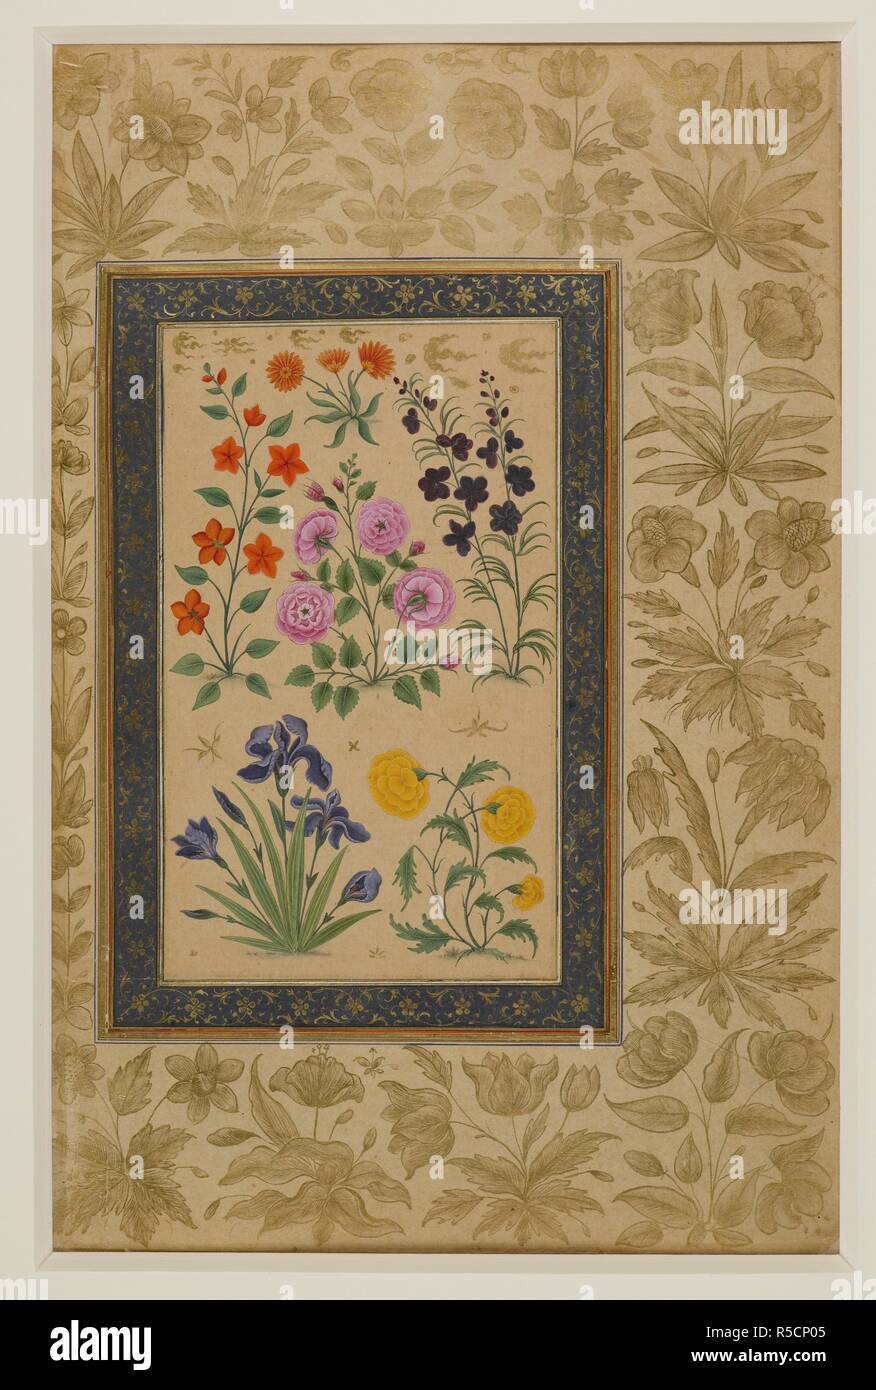 A pink rose, a blue iris, a pimpernel and other flowering plants; gold clouds at top. Dara Shikoh Album. 1630 - 1640. Opaque watercolour. Gouache with gold; background uncoloured. Source: Add.Or.3129, f.67v. Author: ANON. Stock Photo